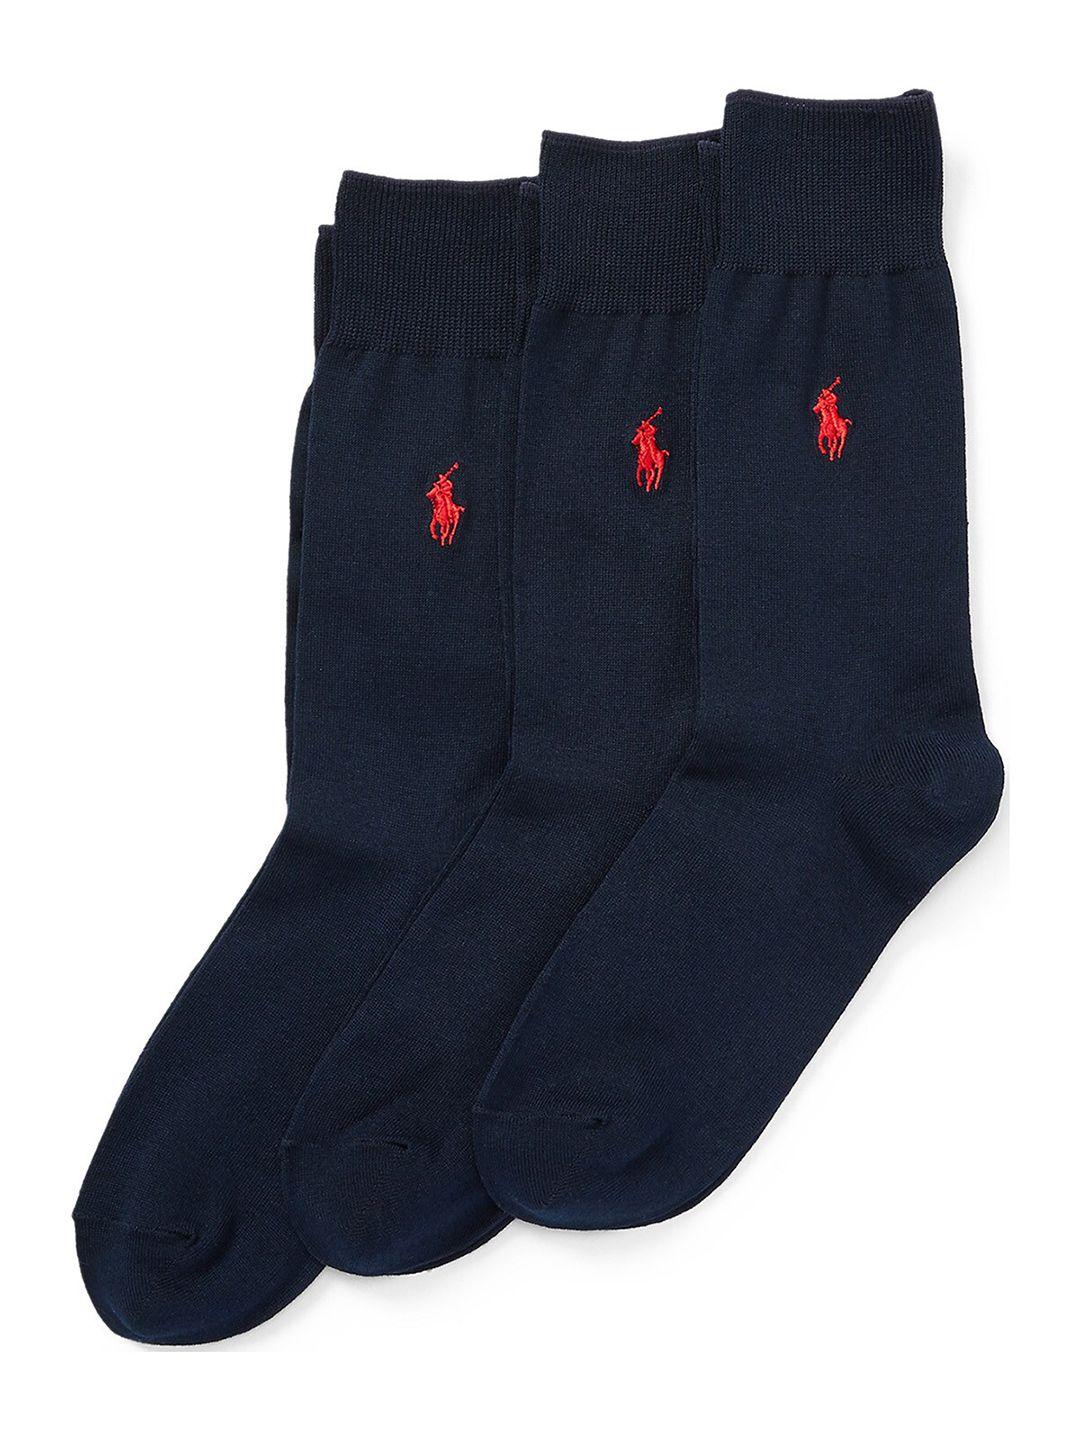 polo ralph lauren men pack of 3 brand logo embroidered cotton above ankle socks